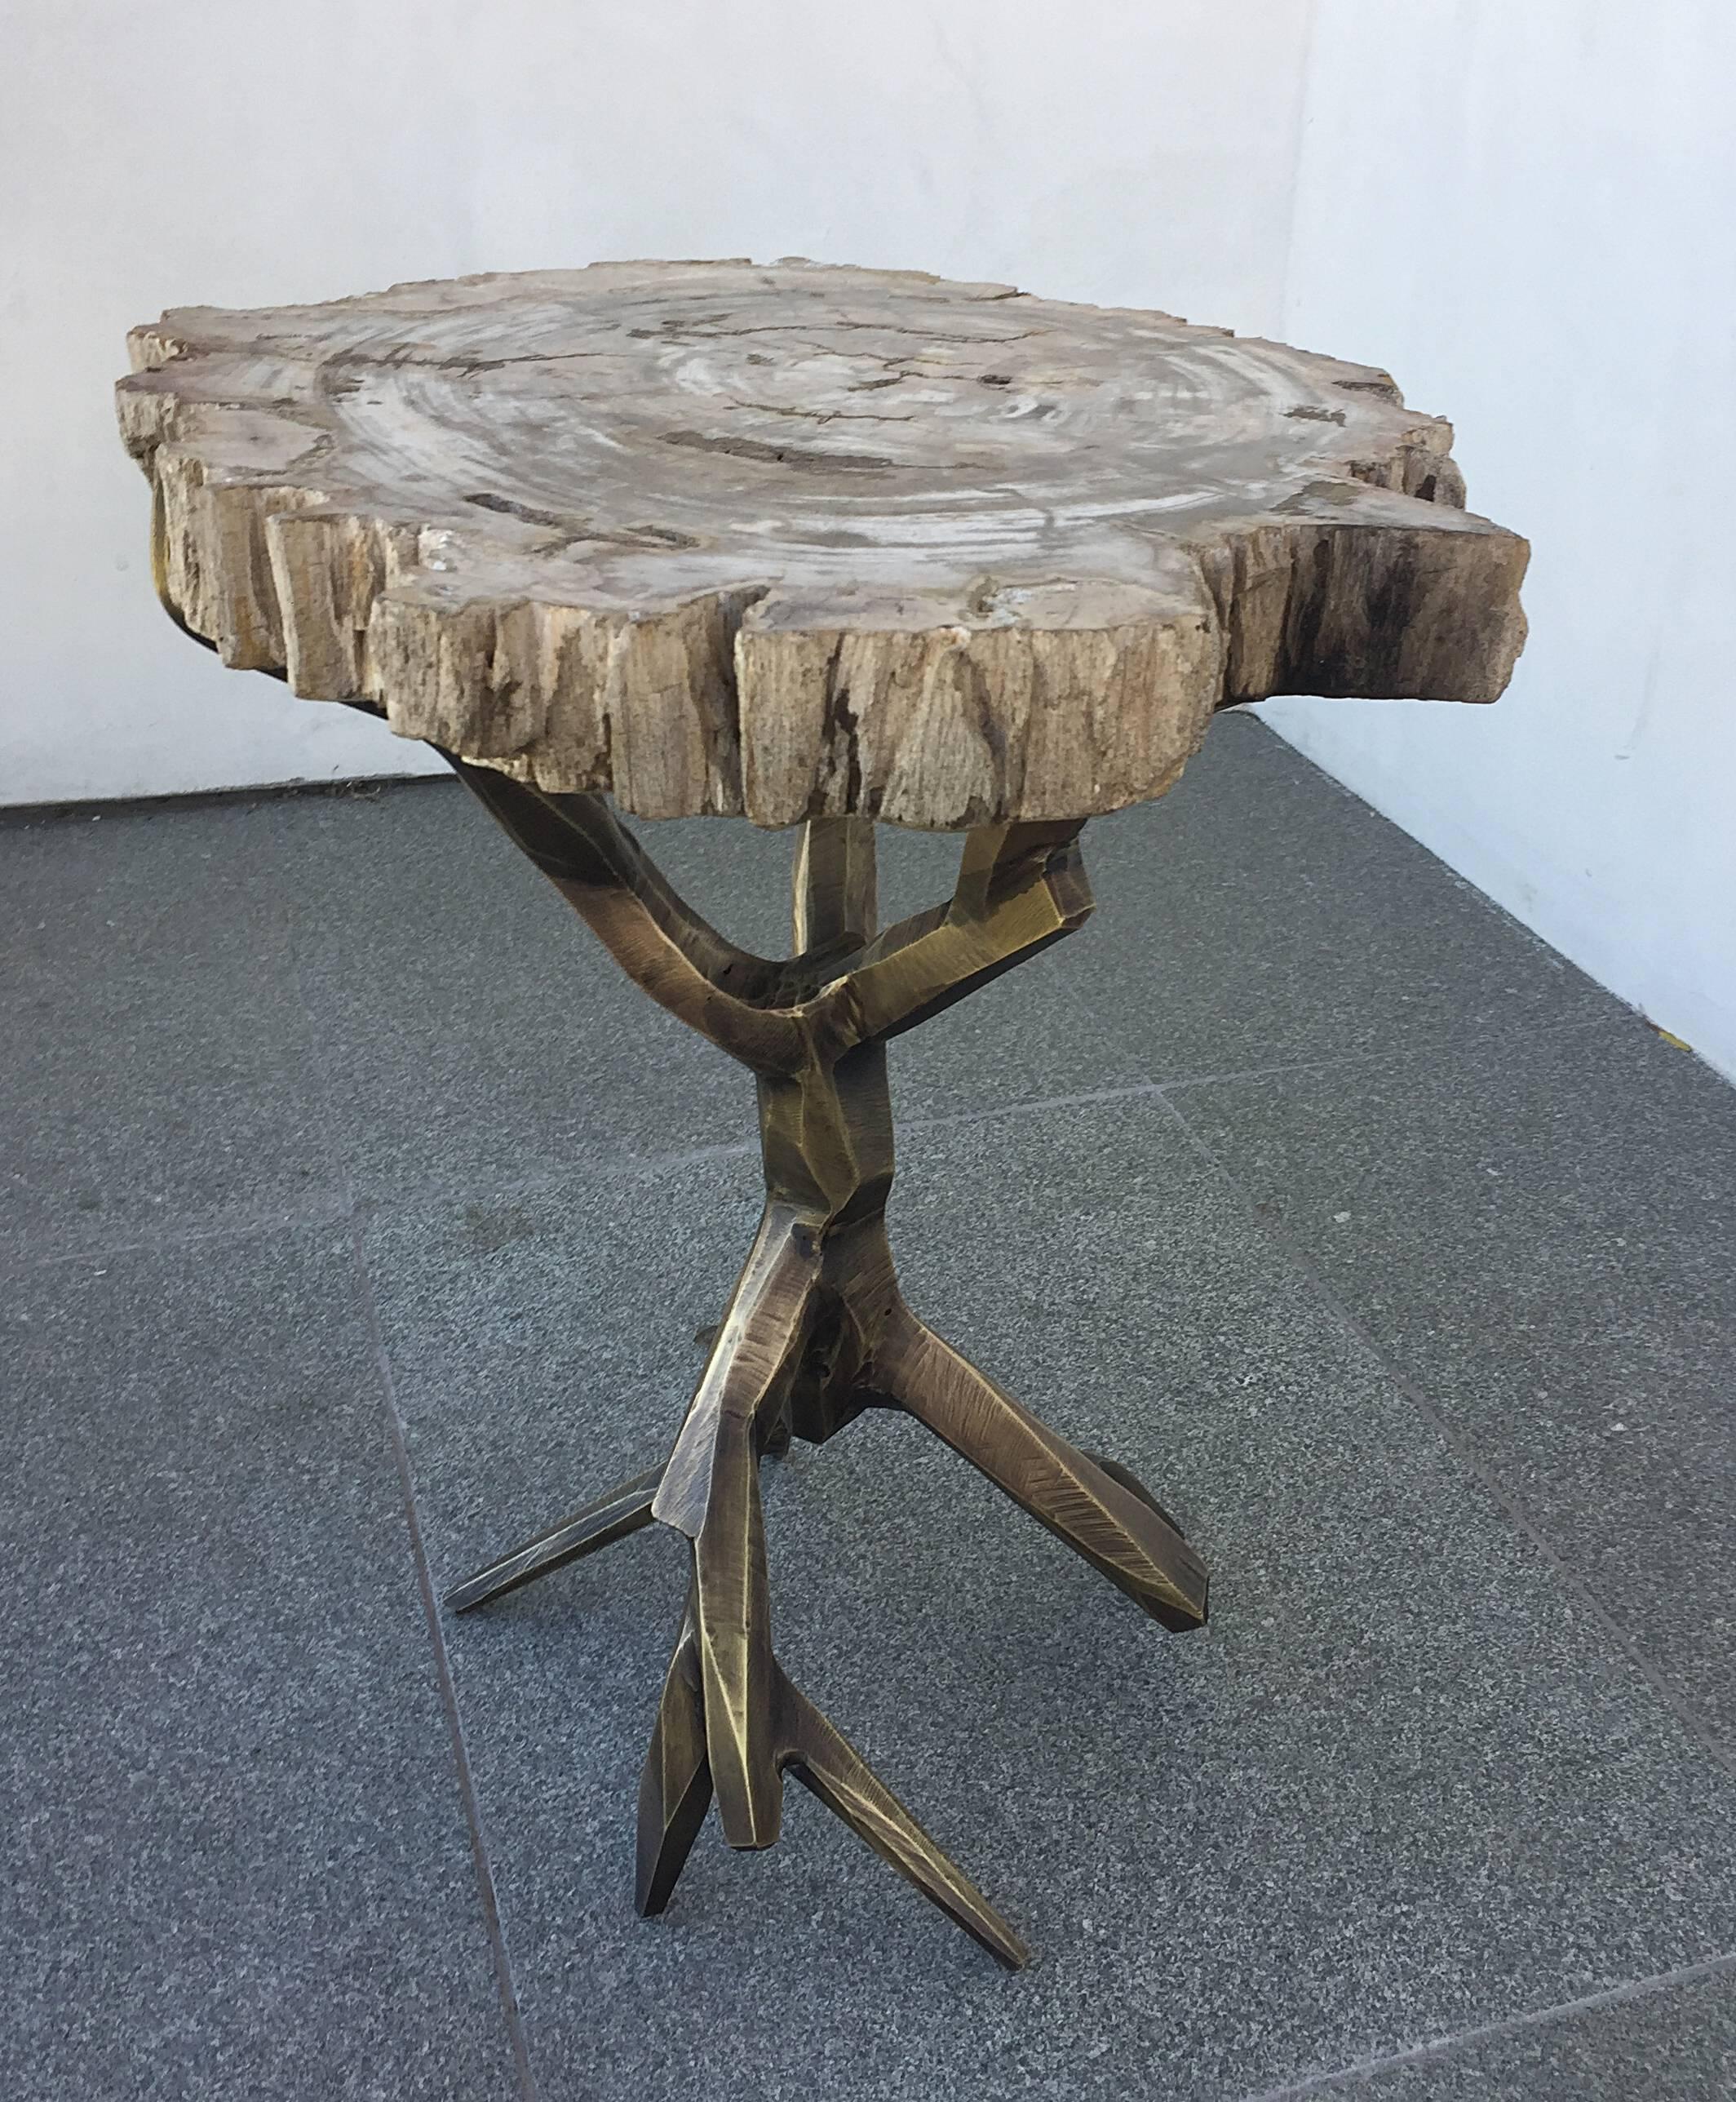 Beautiful side table made out of solid brass with a bronze finish is a one of a kind creation by designer Amparo Calderon Tapia designed exclusively for Cain modern.
The piece is part of the series 